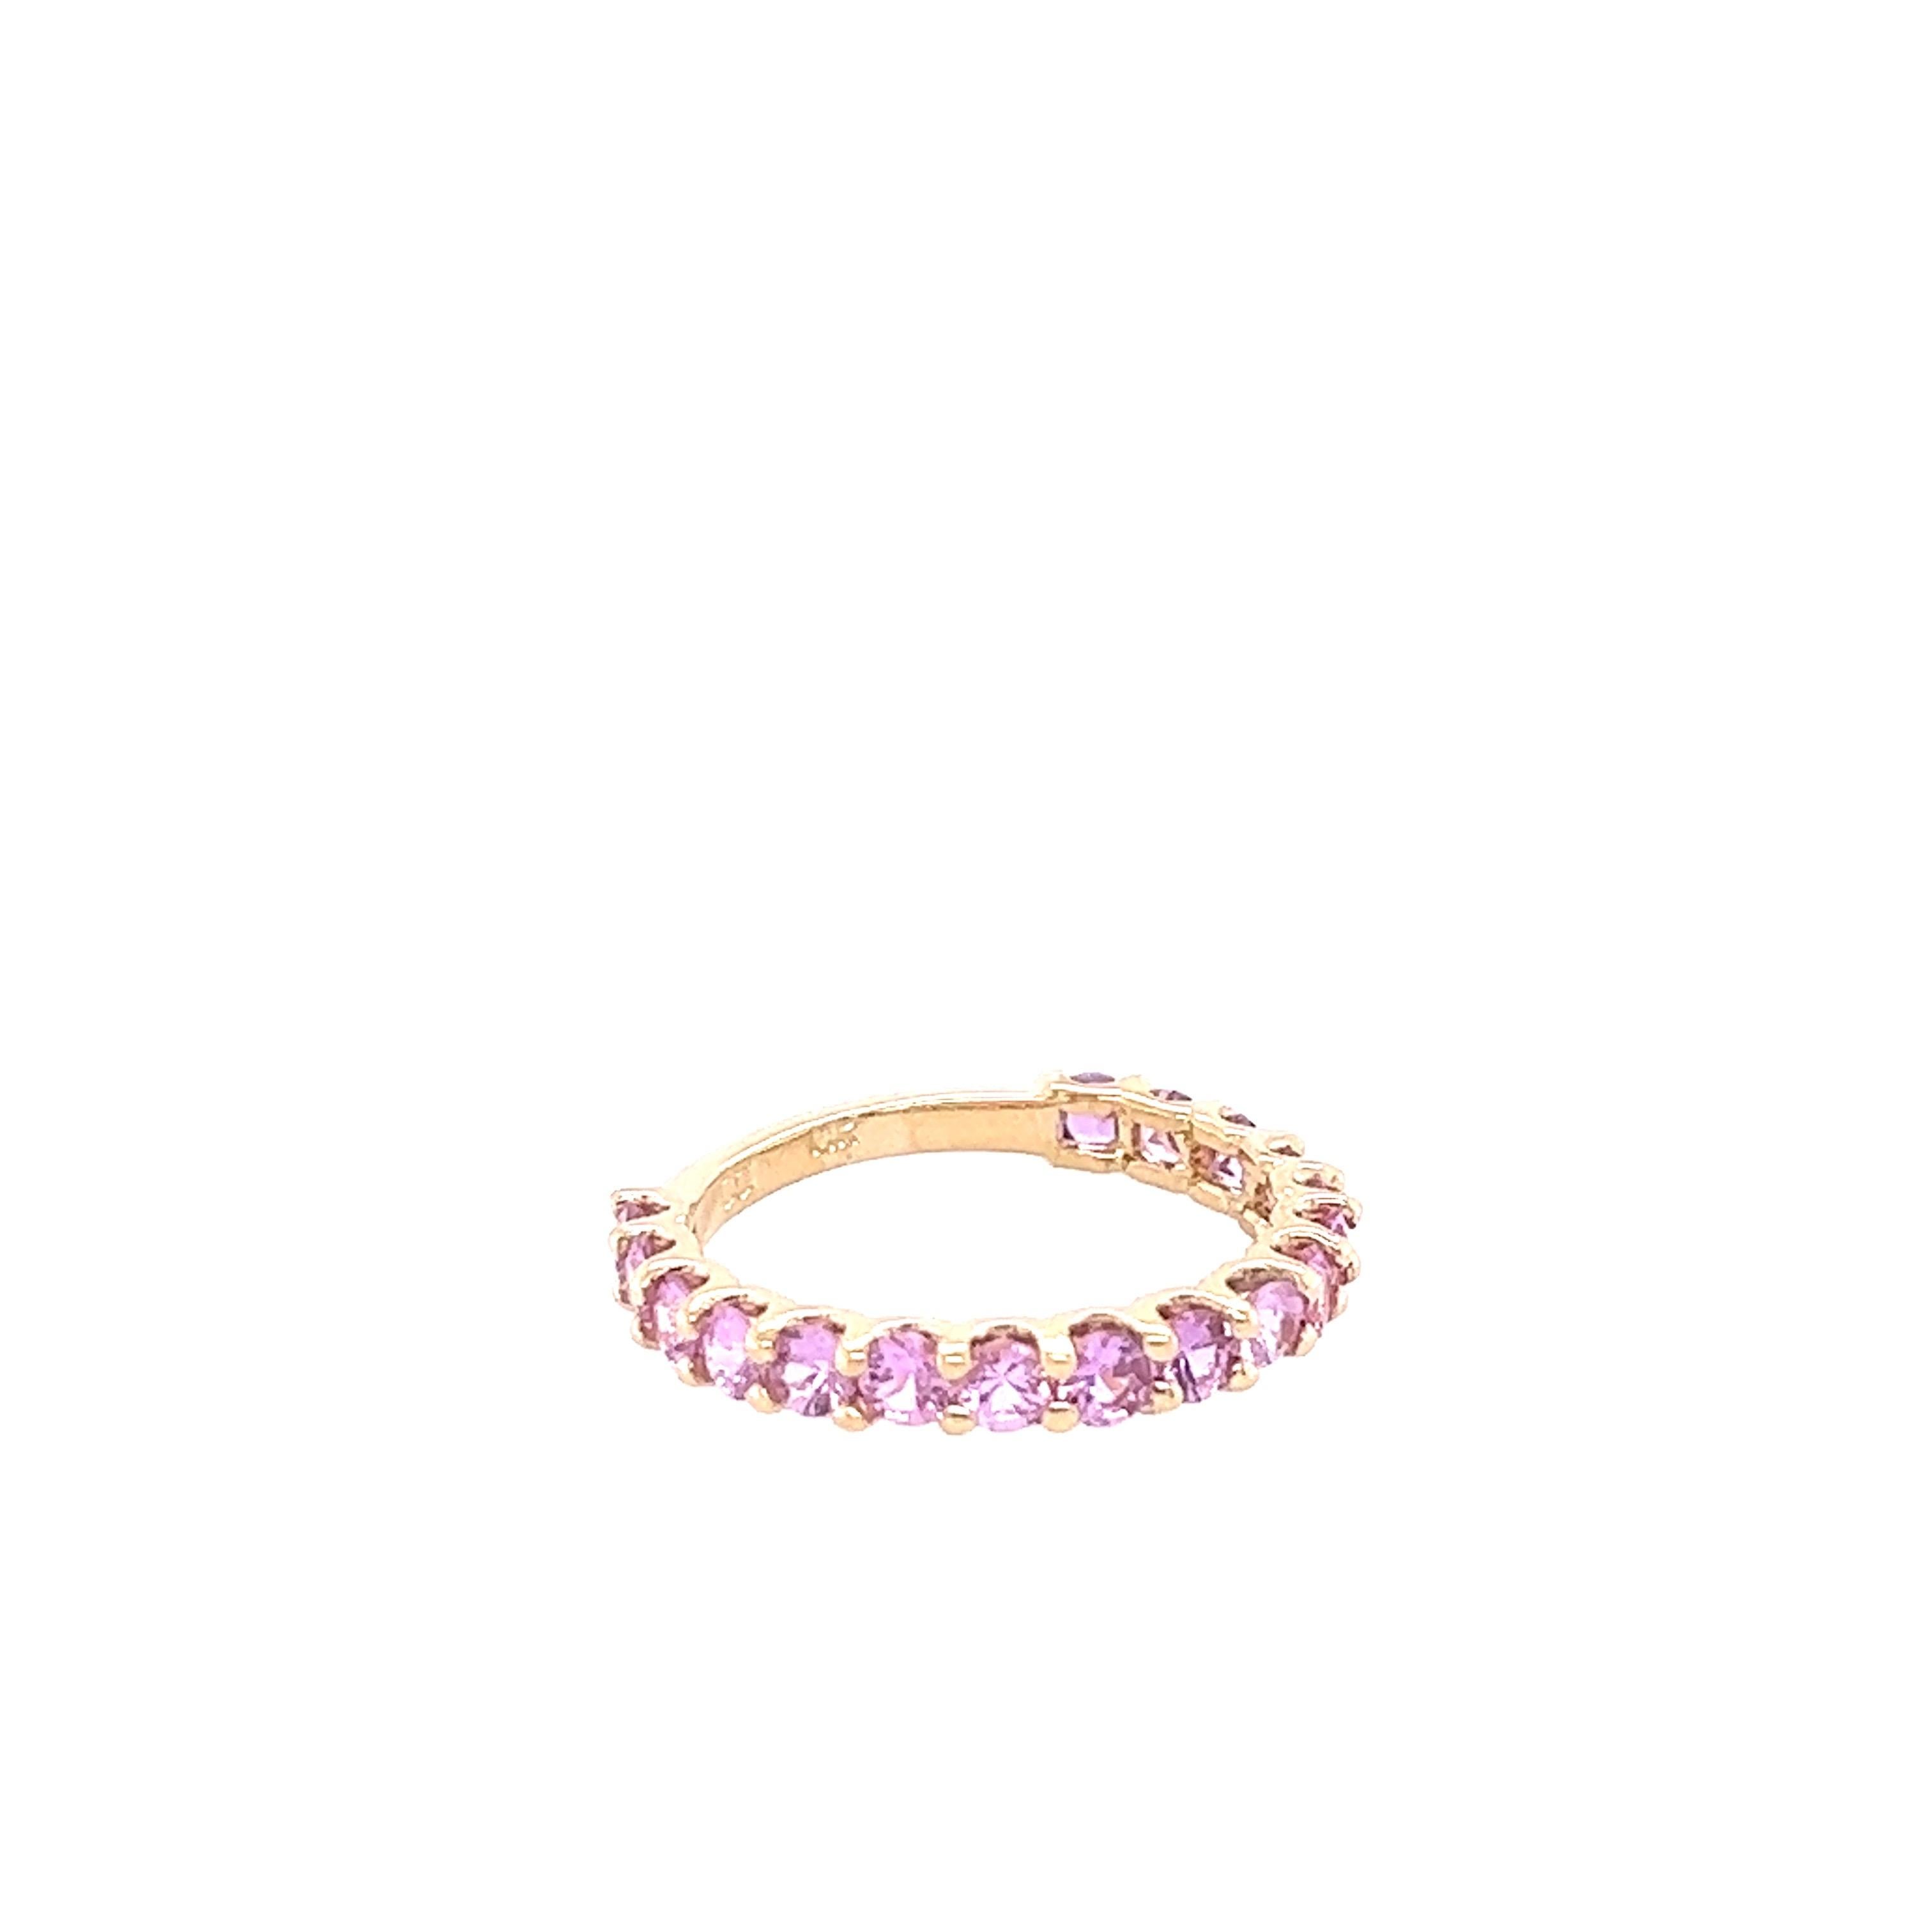 This ring has 17 Natural Pink Sapphires that weigh 1.81 Carats. 

Crafted in 14 Karat Yellow Gold and is approximately 2.2 grams 

The ring is a size 7 and can be re-sized at no additional charge.